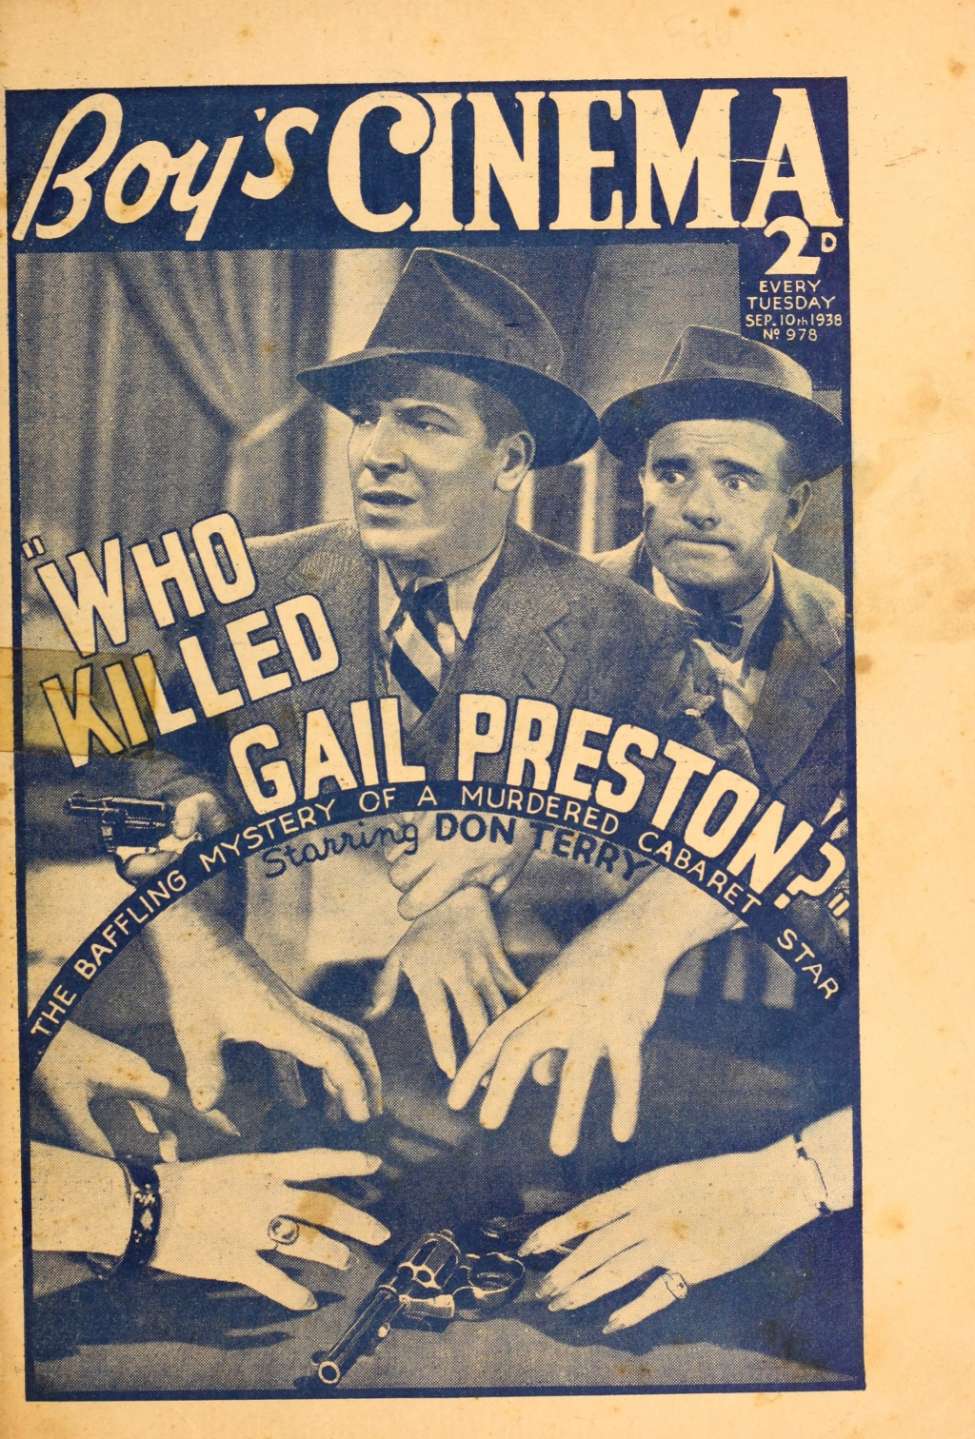 Comic Book Cover For Boy's Cinema 978 - Who Killed Gail Preston - Don Terry